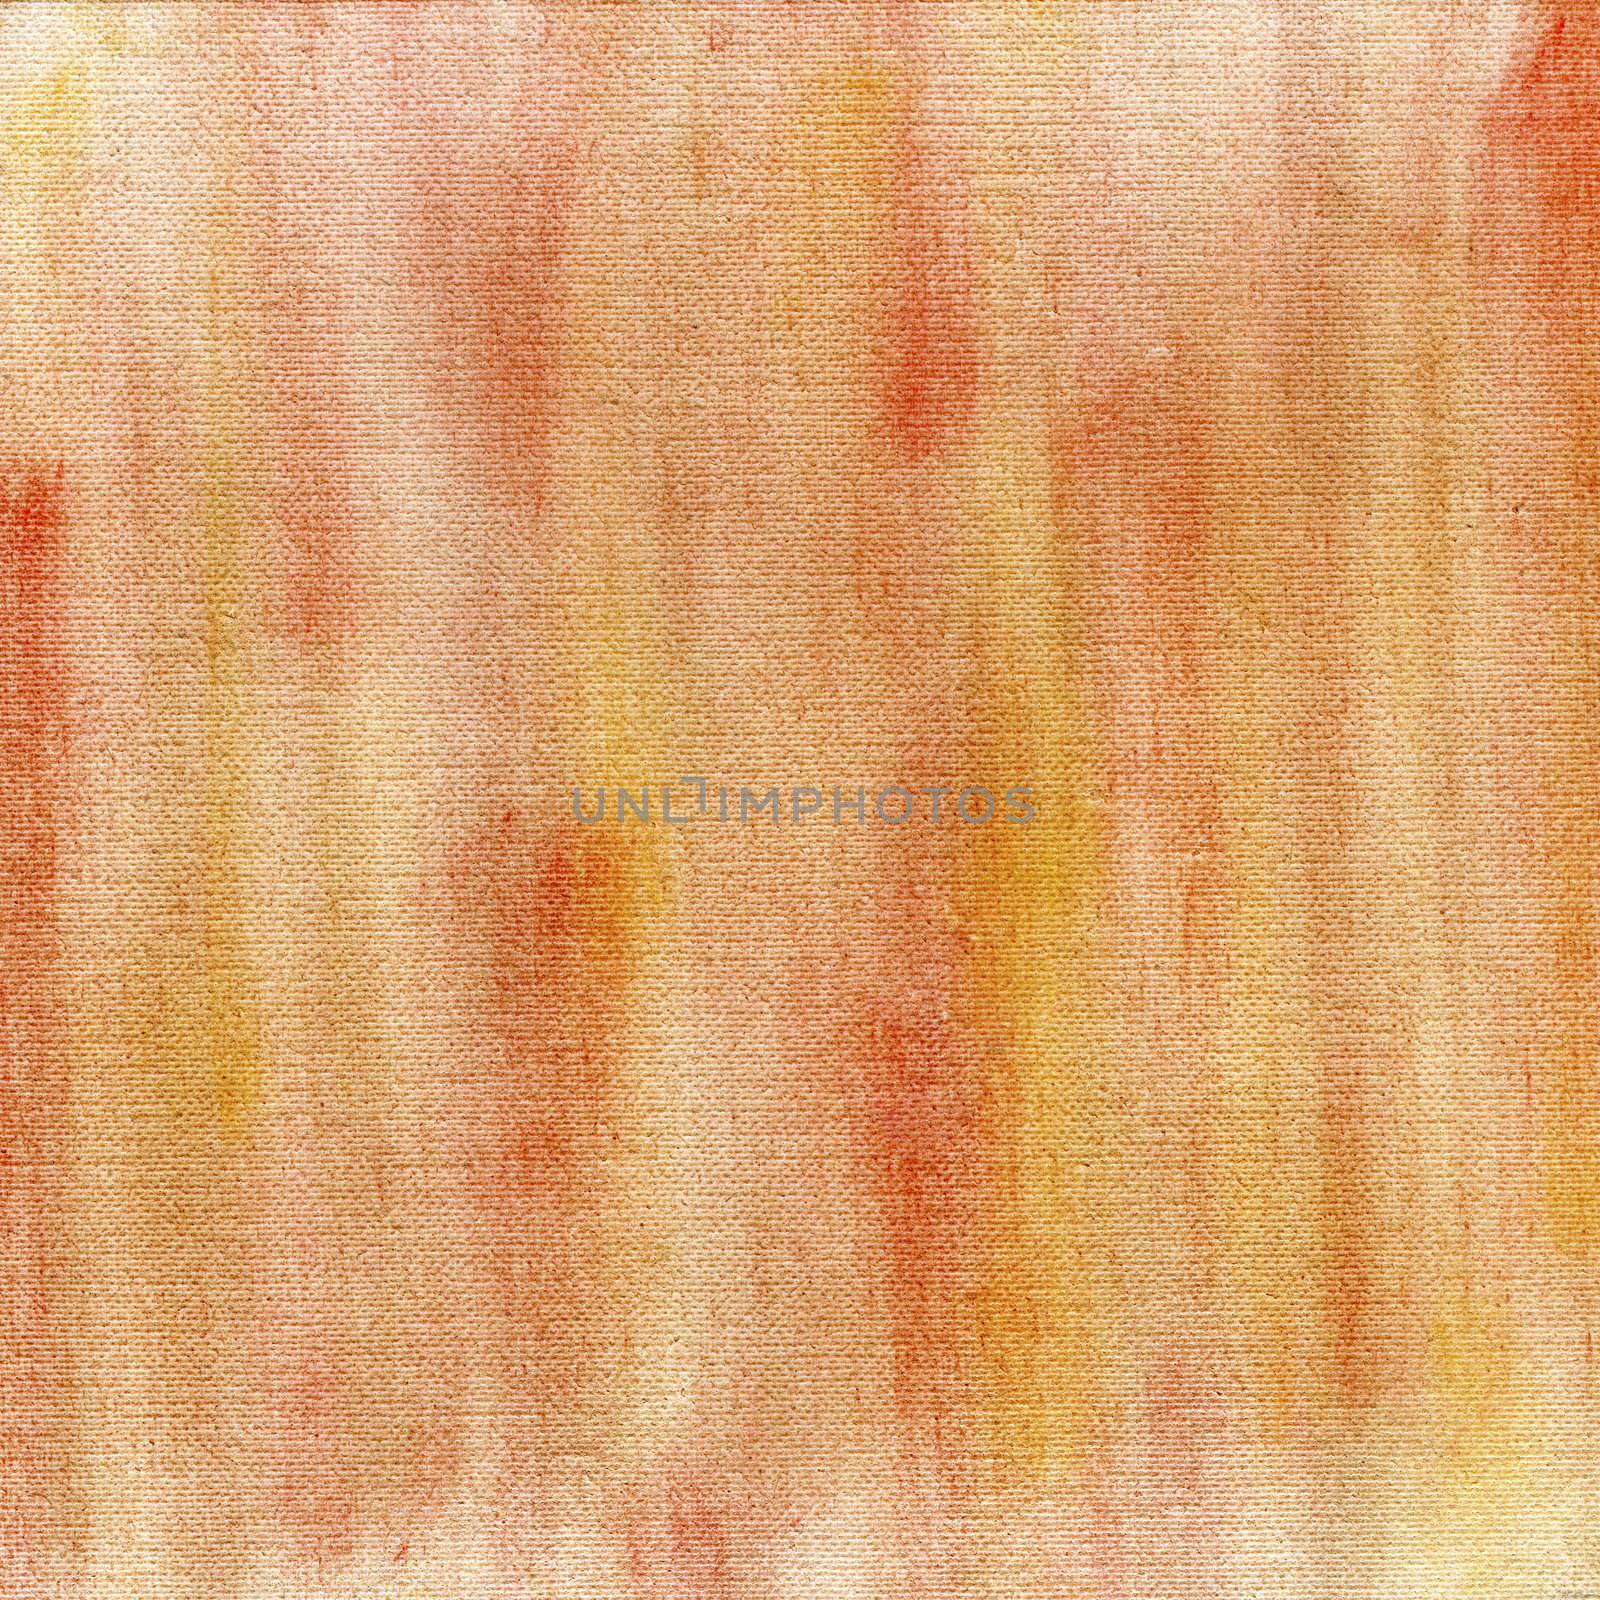 red and yellow crayon pastel smudges on white artist canvas, self made by photographer